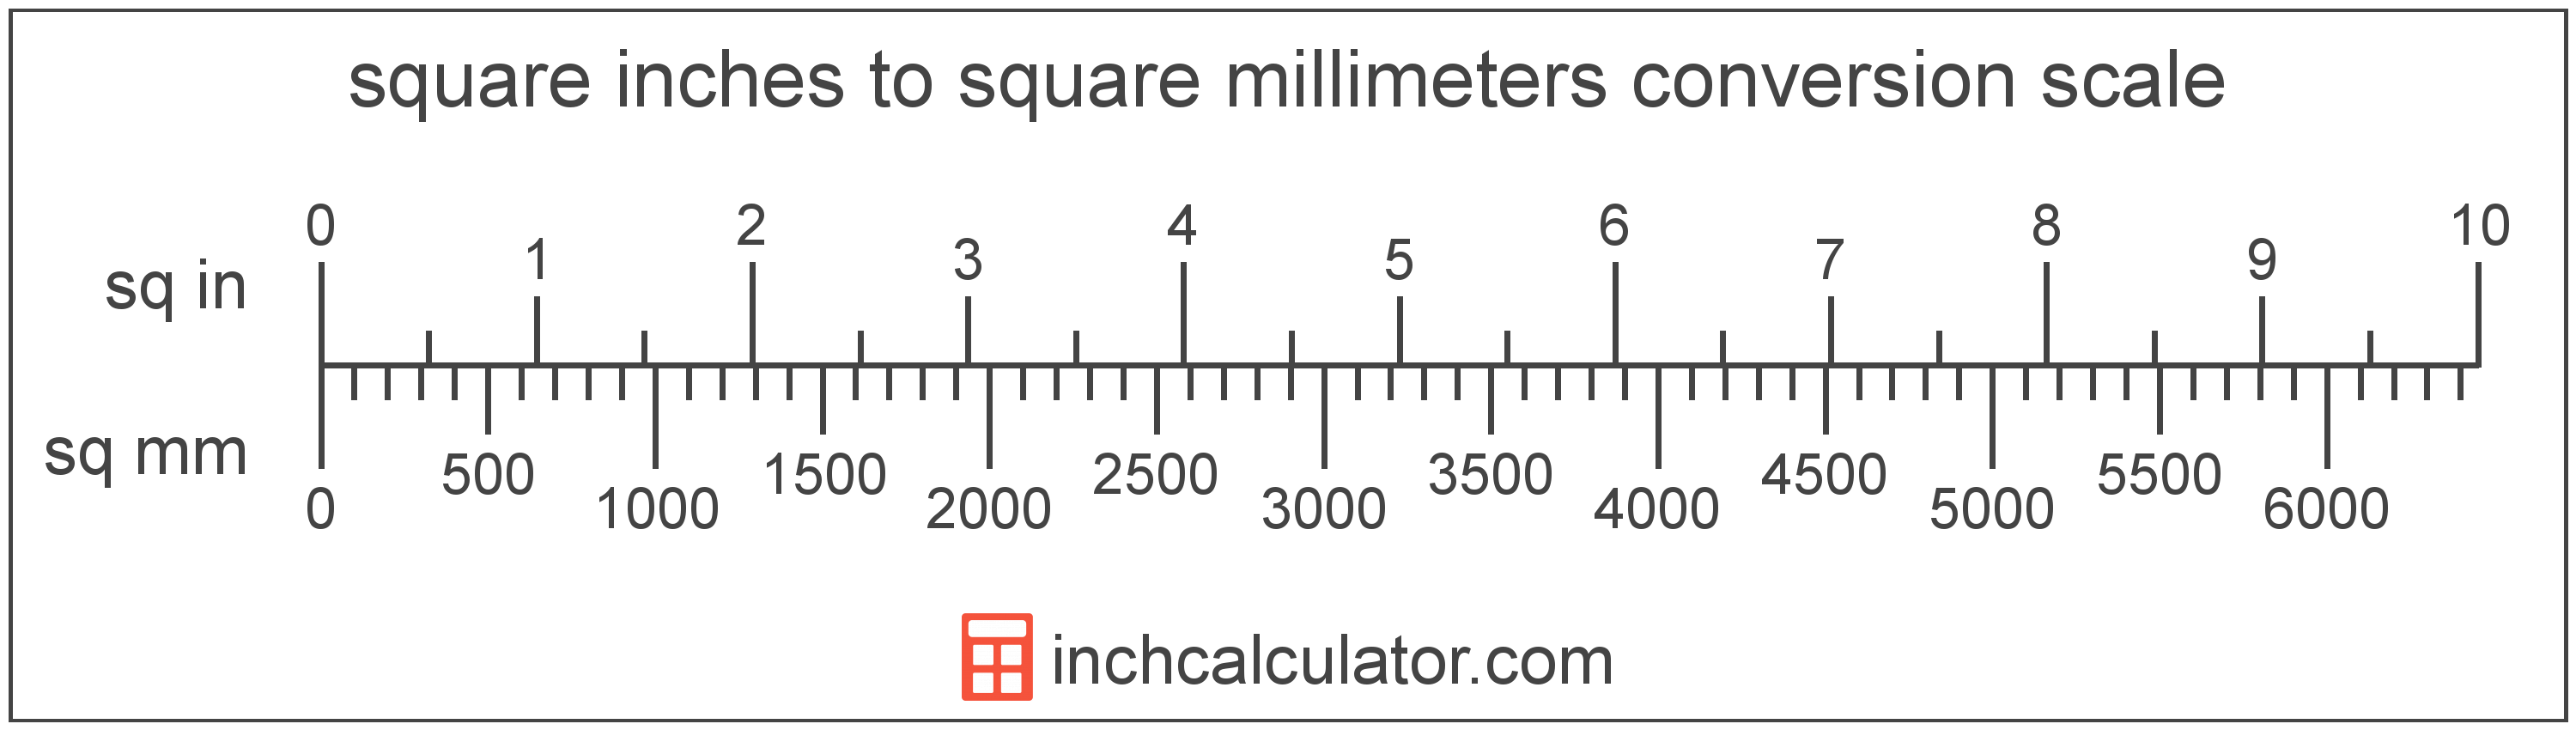 conversion scale showing square inches and equivalent square millimeters area values